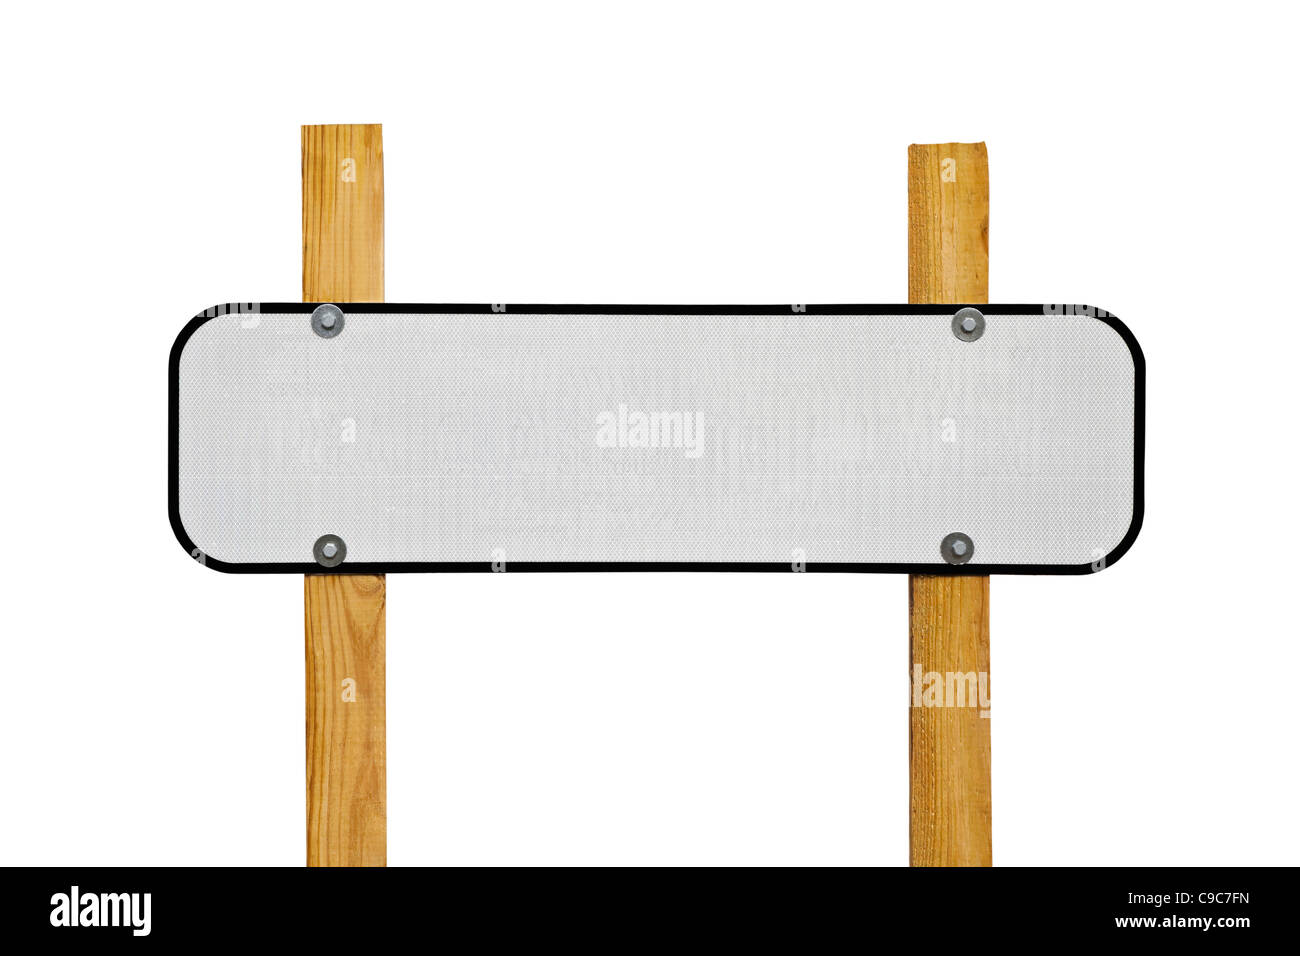 Blank reflective highway message sign on wooden posts. Stock Photo